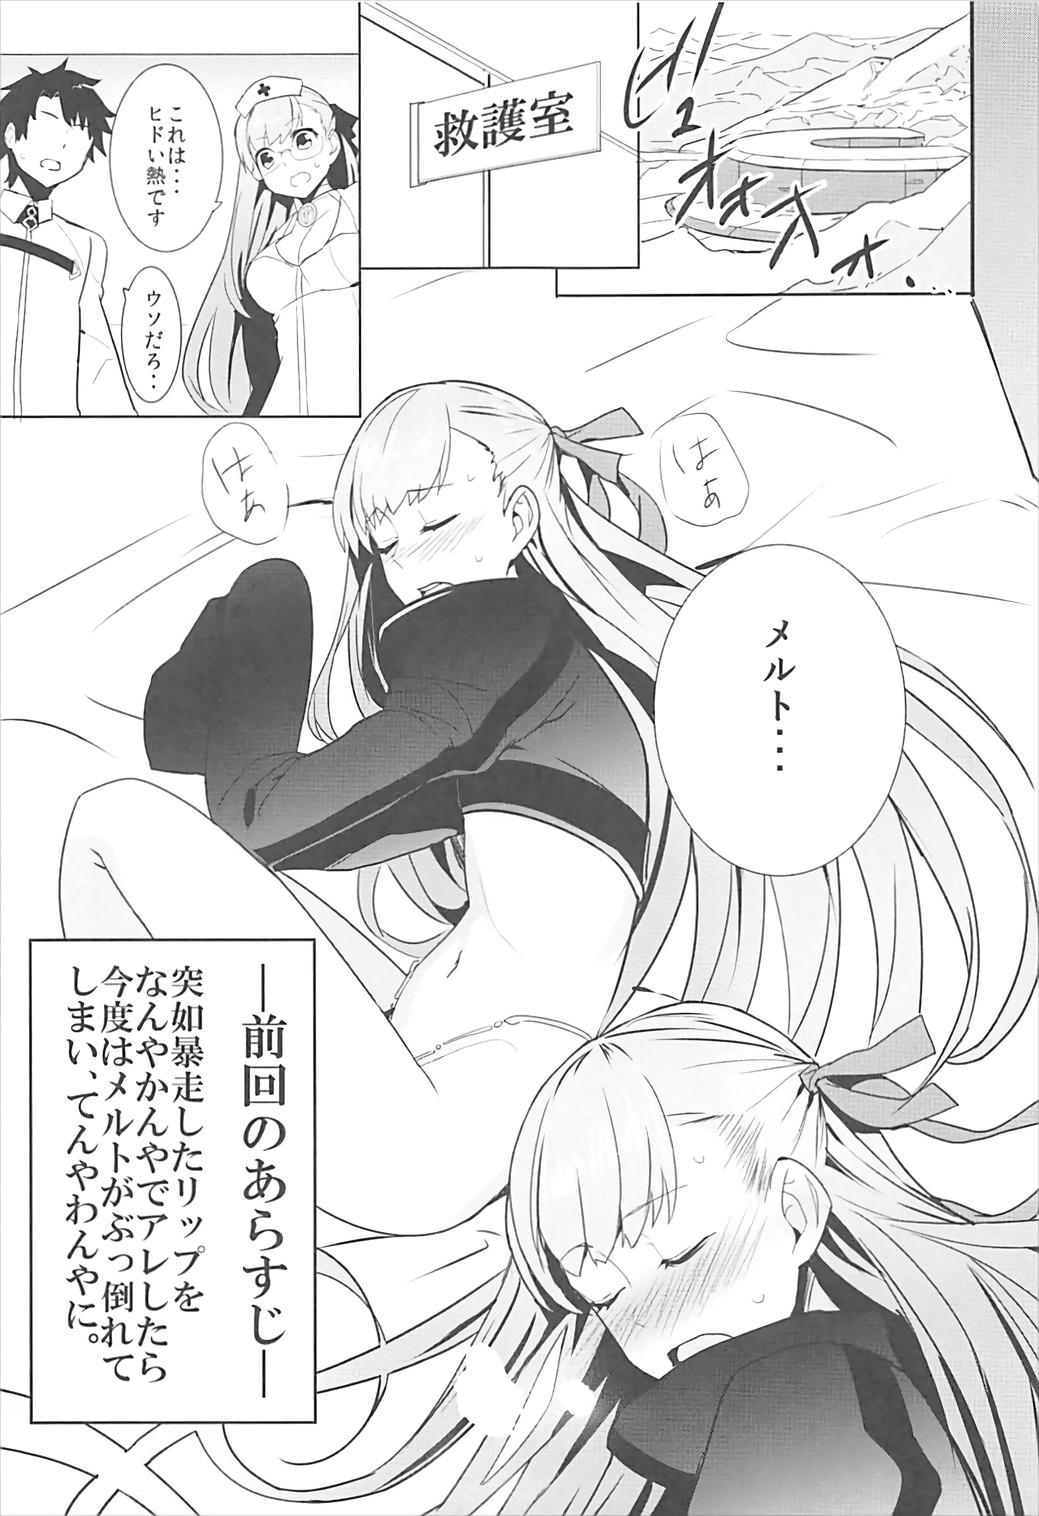 Porn In the Passion Melty heart.2 - Fate grand order Putaria - Page 4